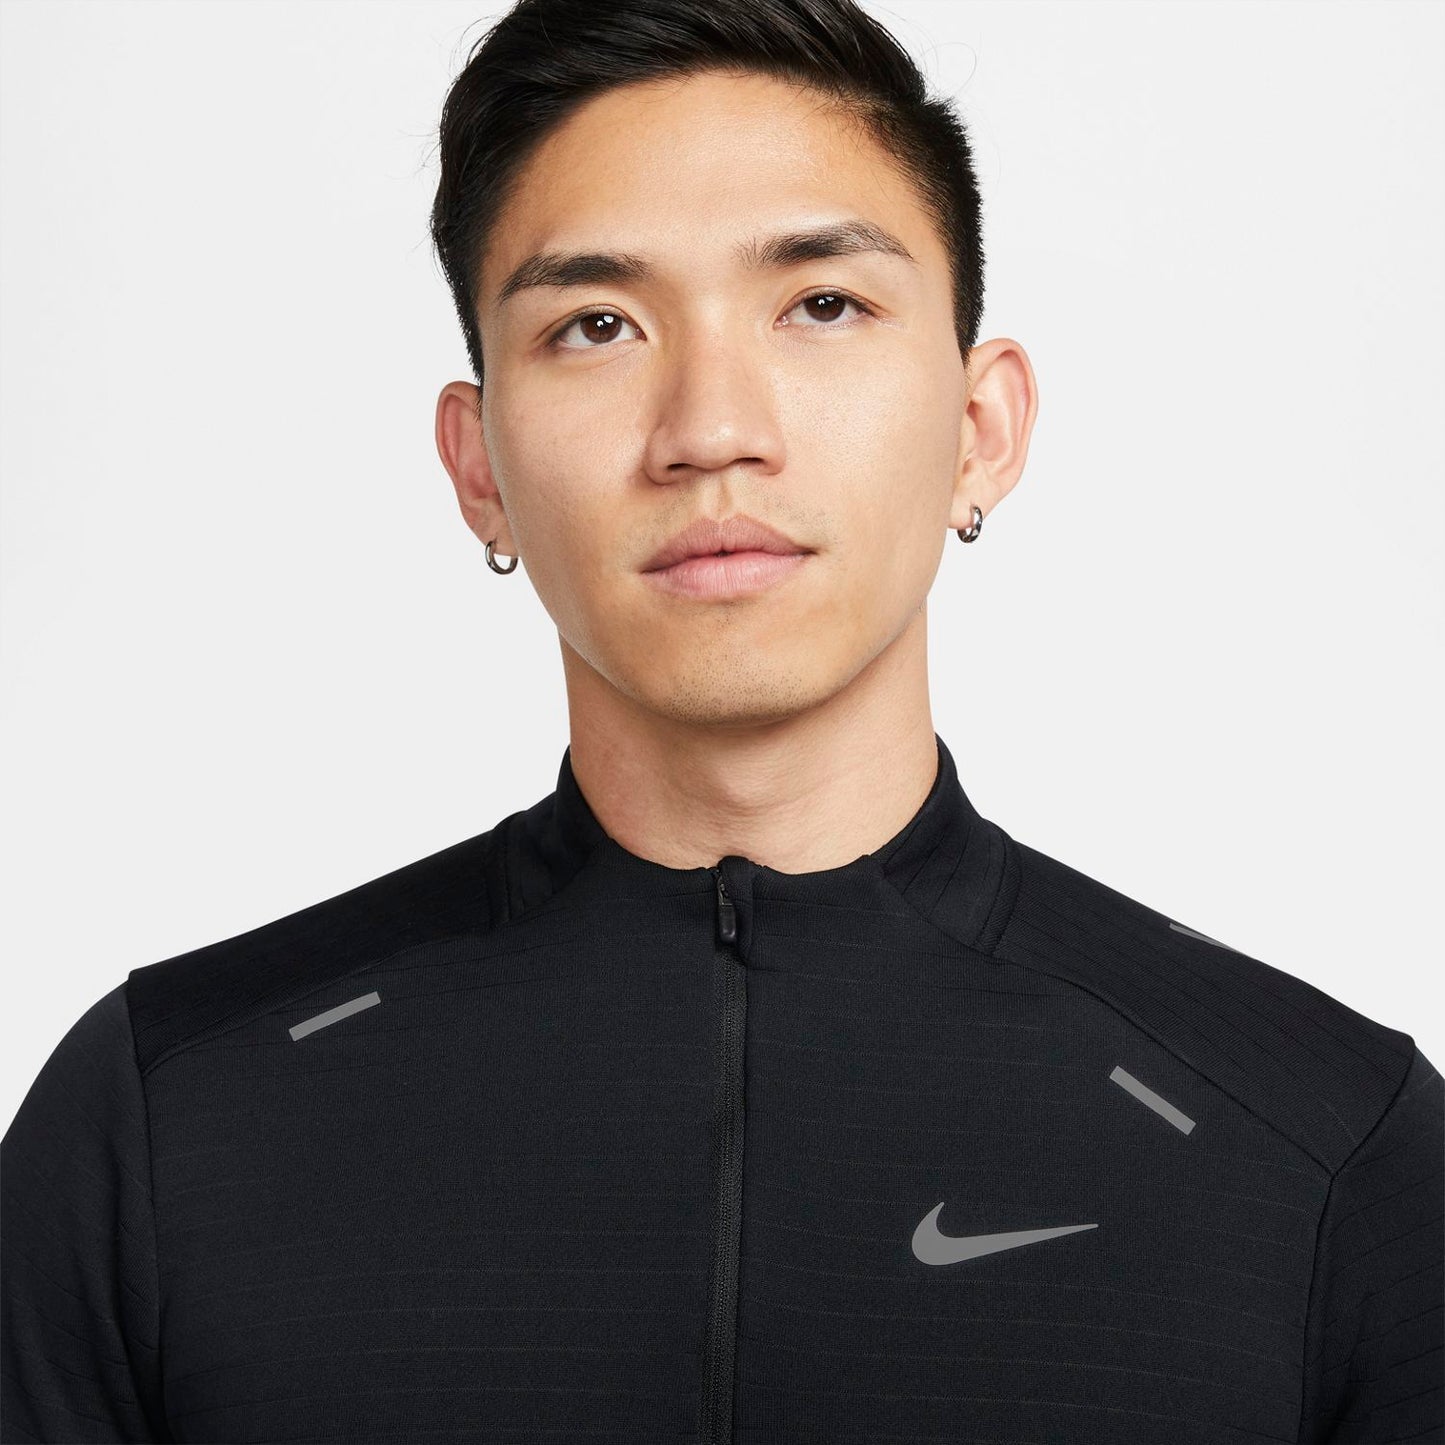 Men's Nike Therma-FIT Repel Element 1/2-Zip Running Top - Black/Reflective Silver